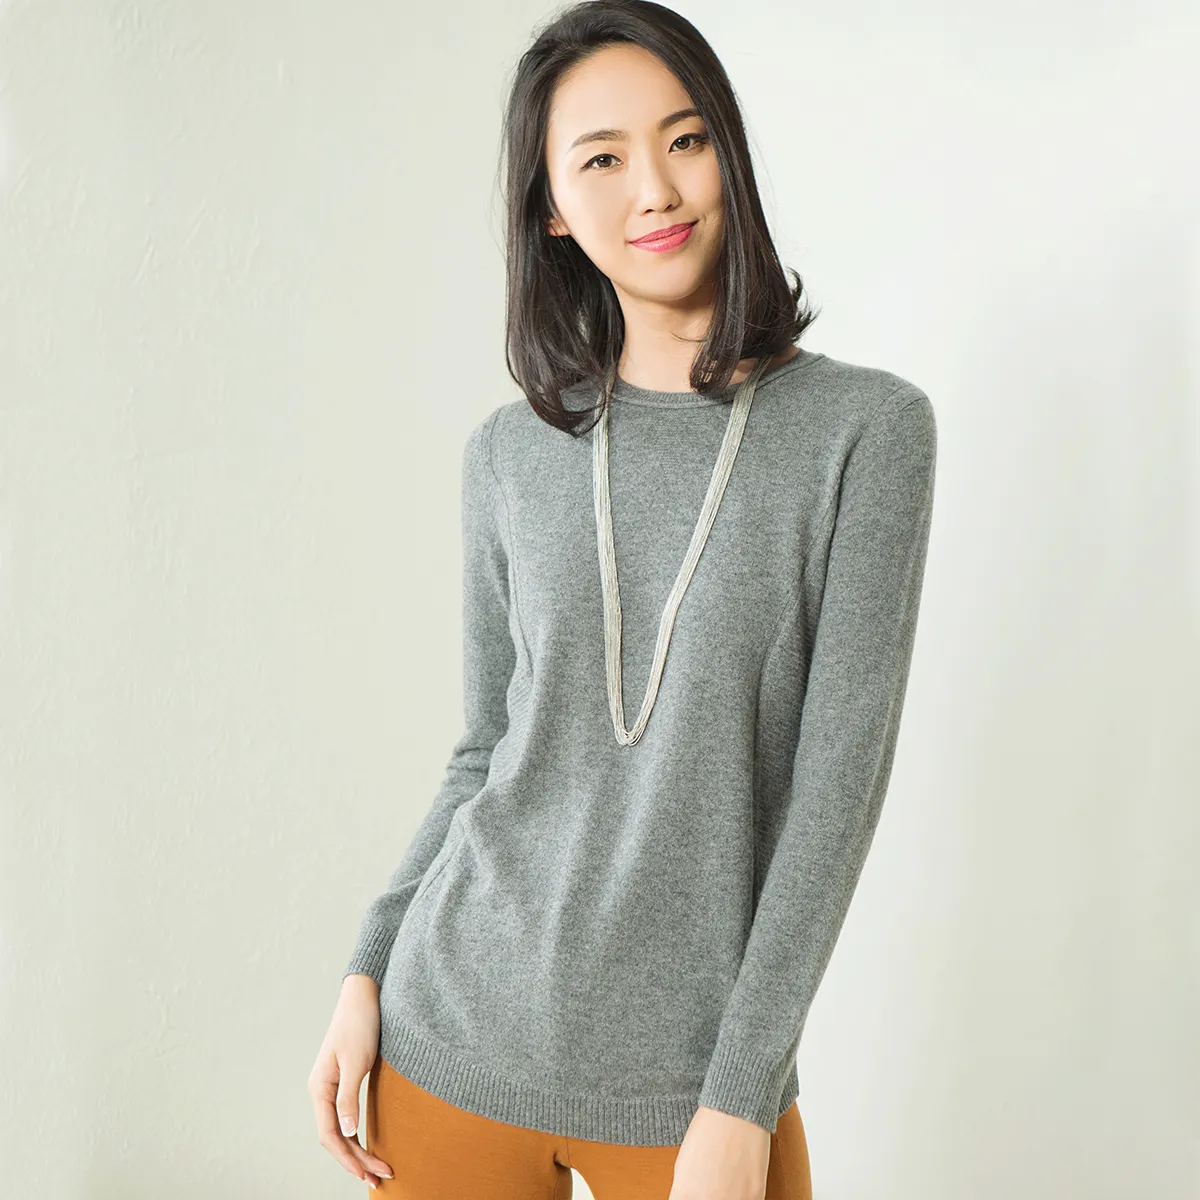 Autumn Winter Women Knitwear Cashmere Sweaters Crew Neck Knitted Sweater Jumpers